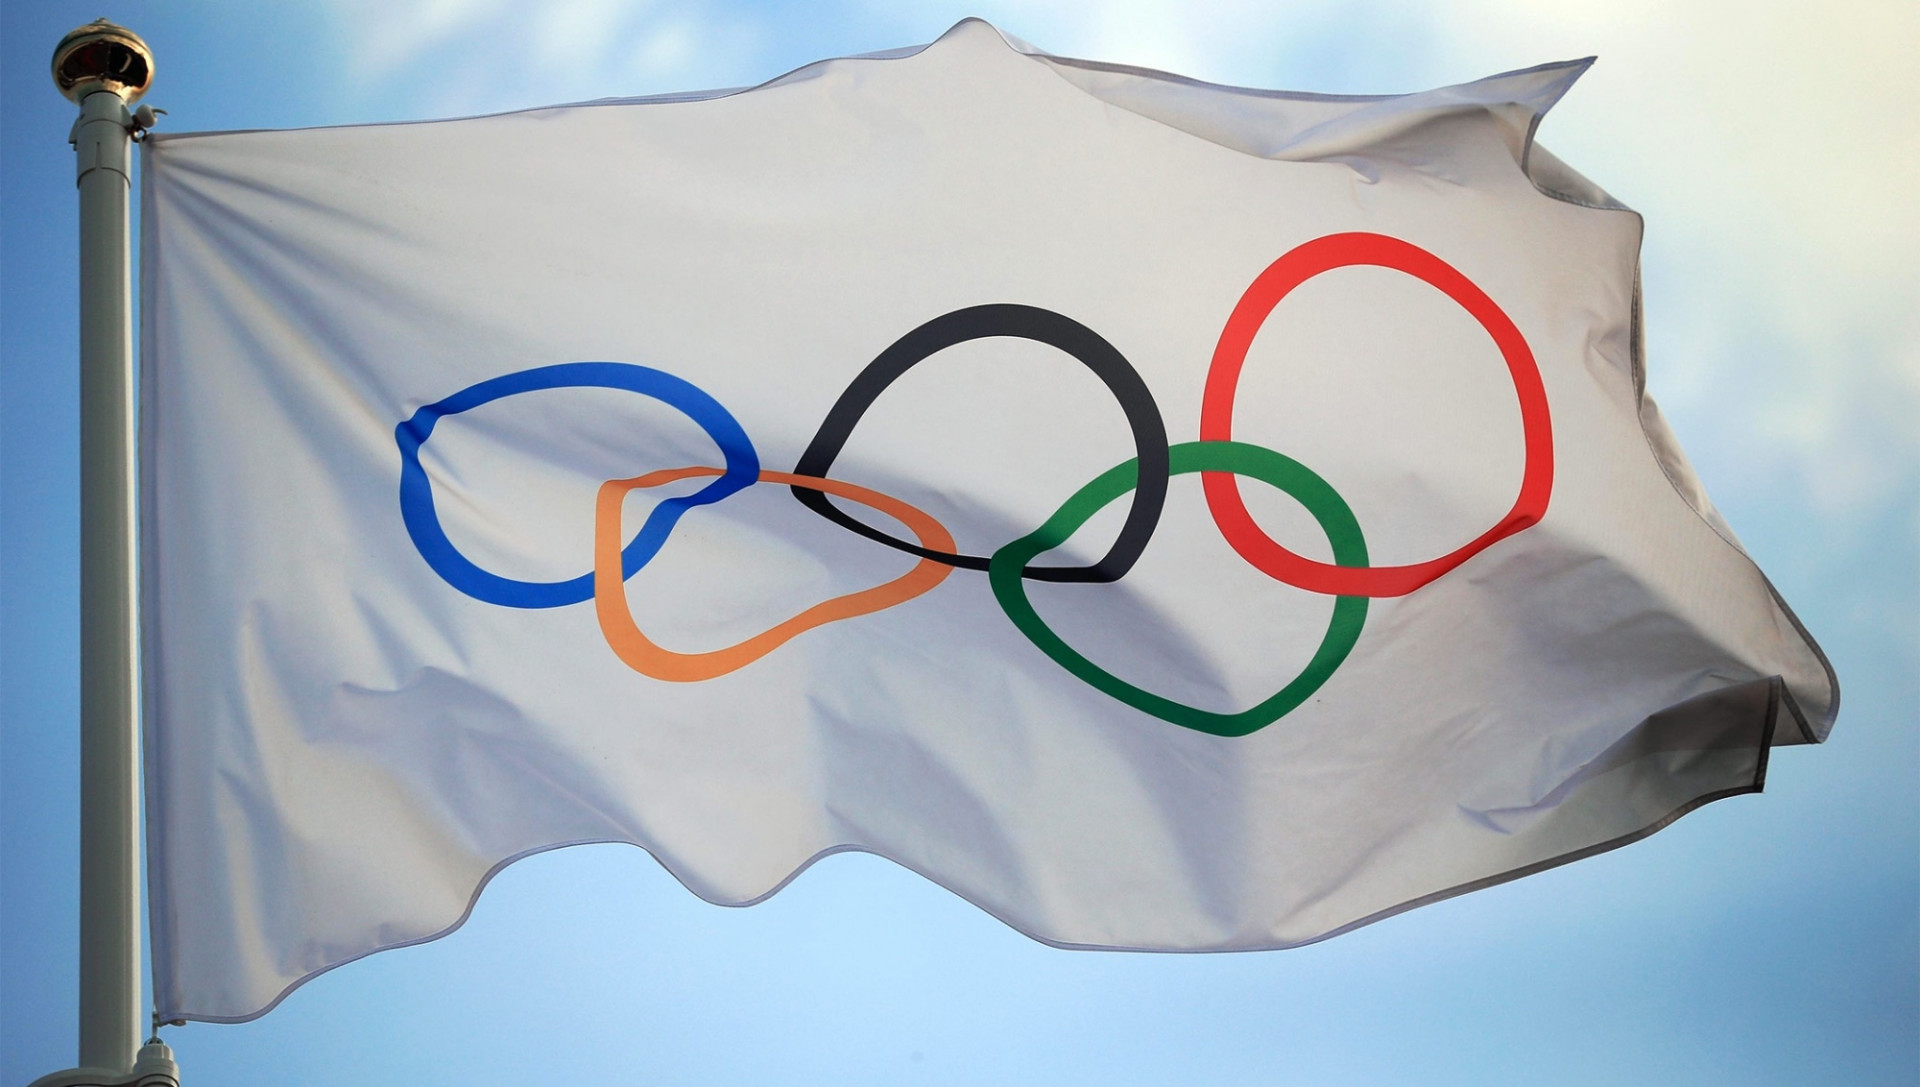 Boxing is set to maintain its place on the sports programme of the Olympic Games Tokyo 2020